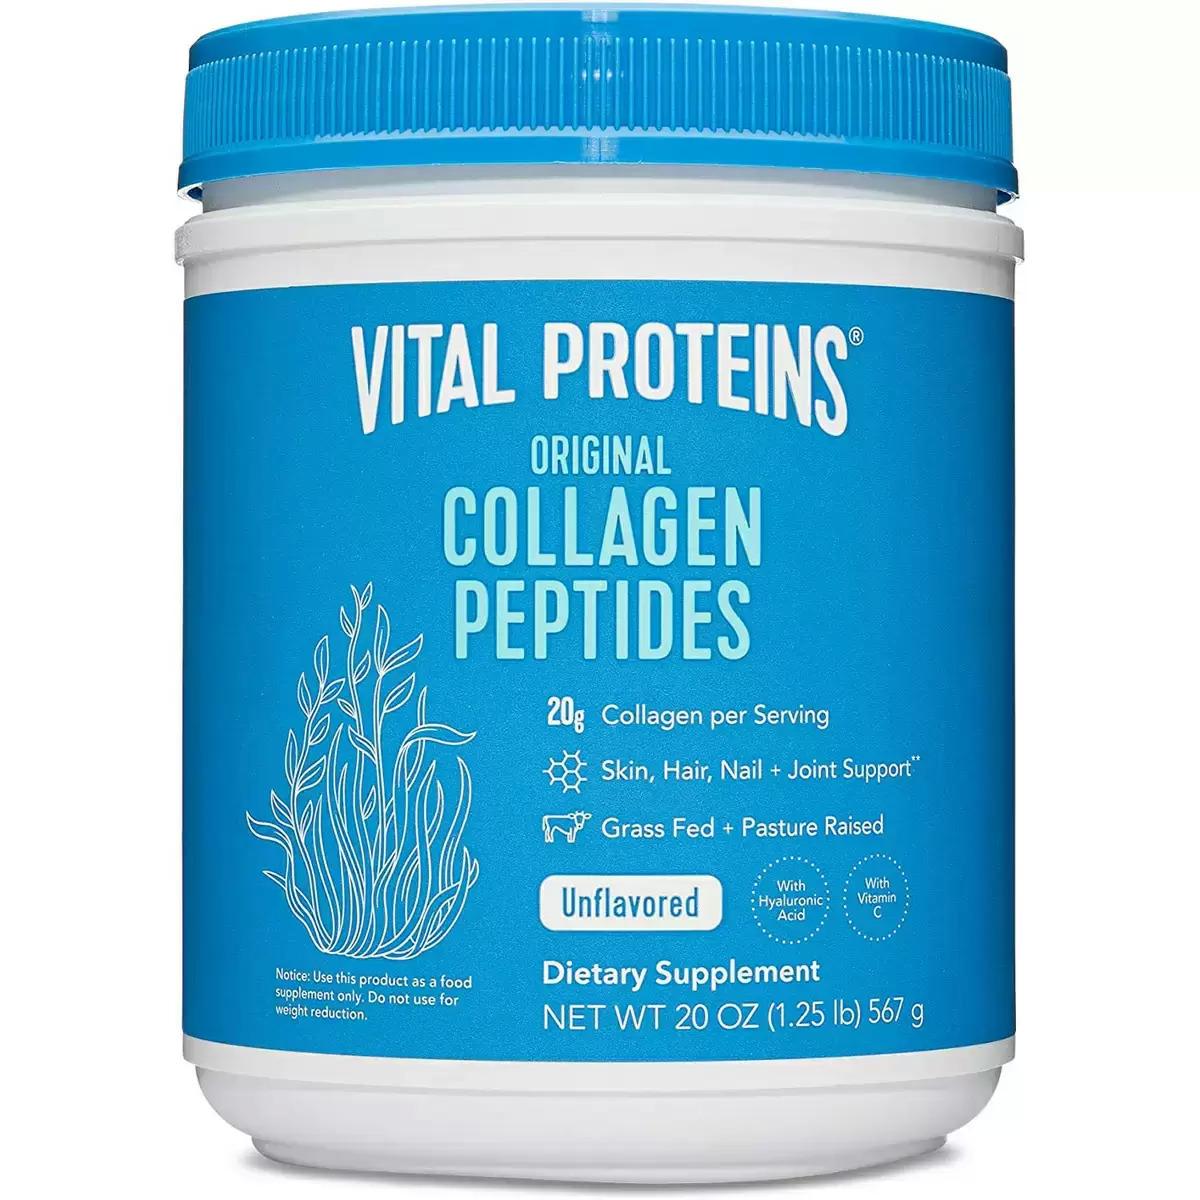 20oz Vital Proteins Collagen Peptide Powder for $28.03 Shipped